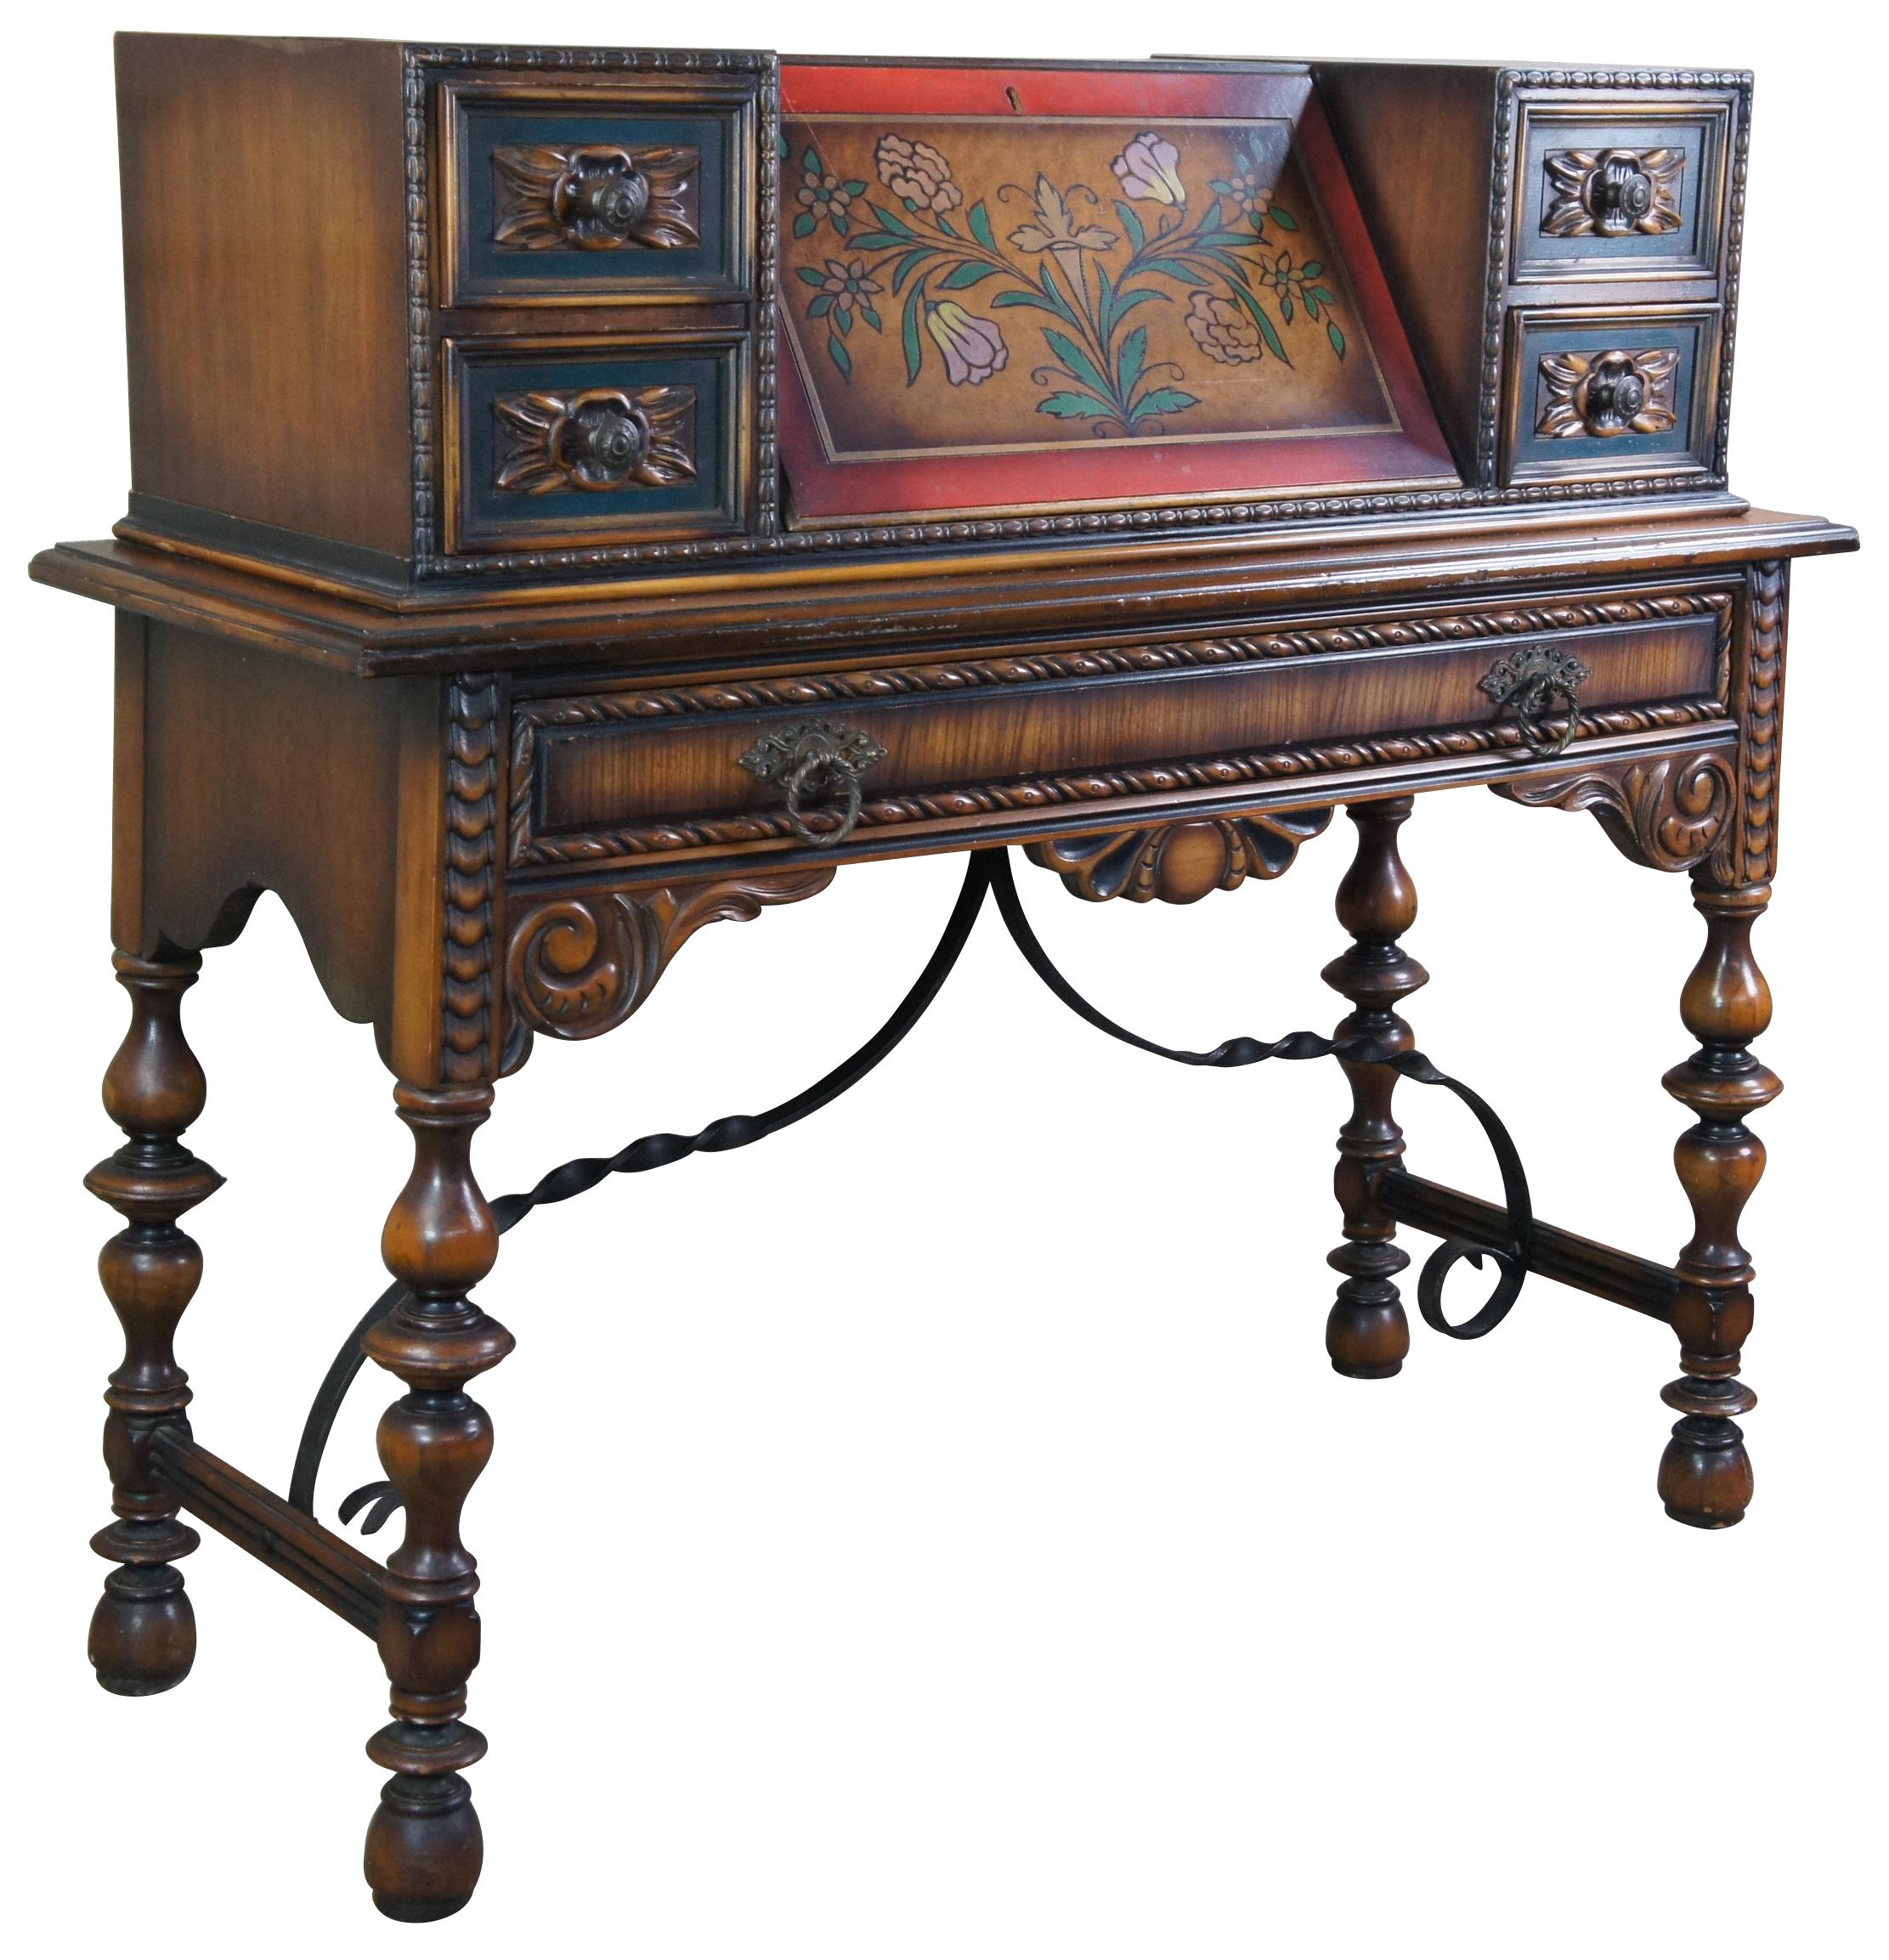 20th Century Jacobean / Spanish Revival secretary desk. Made from walnut with hand carved and painted detail. Features five drawers and interior cubbies for storage. Attributed to Berkey and Gay Furniture Co of Grand Rapids Michigan.

Measures: